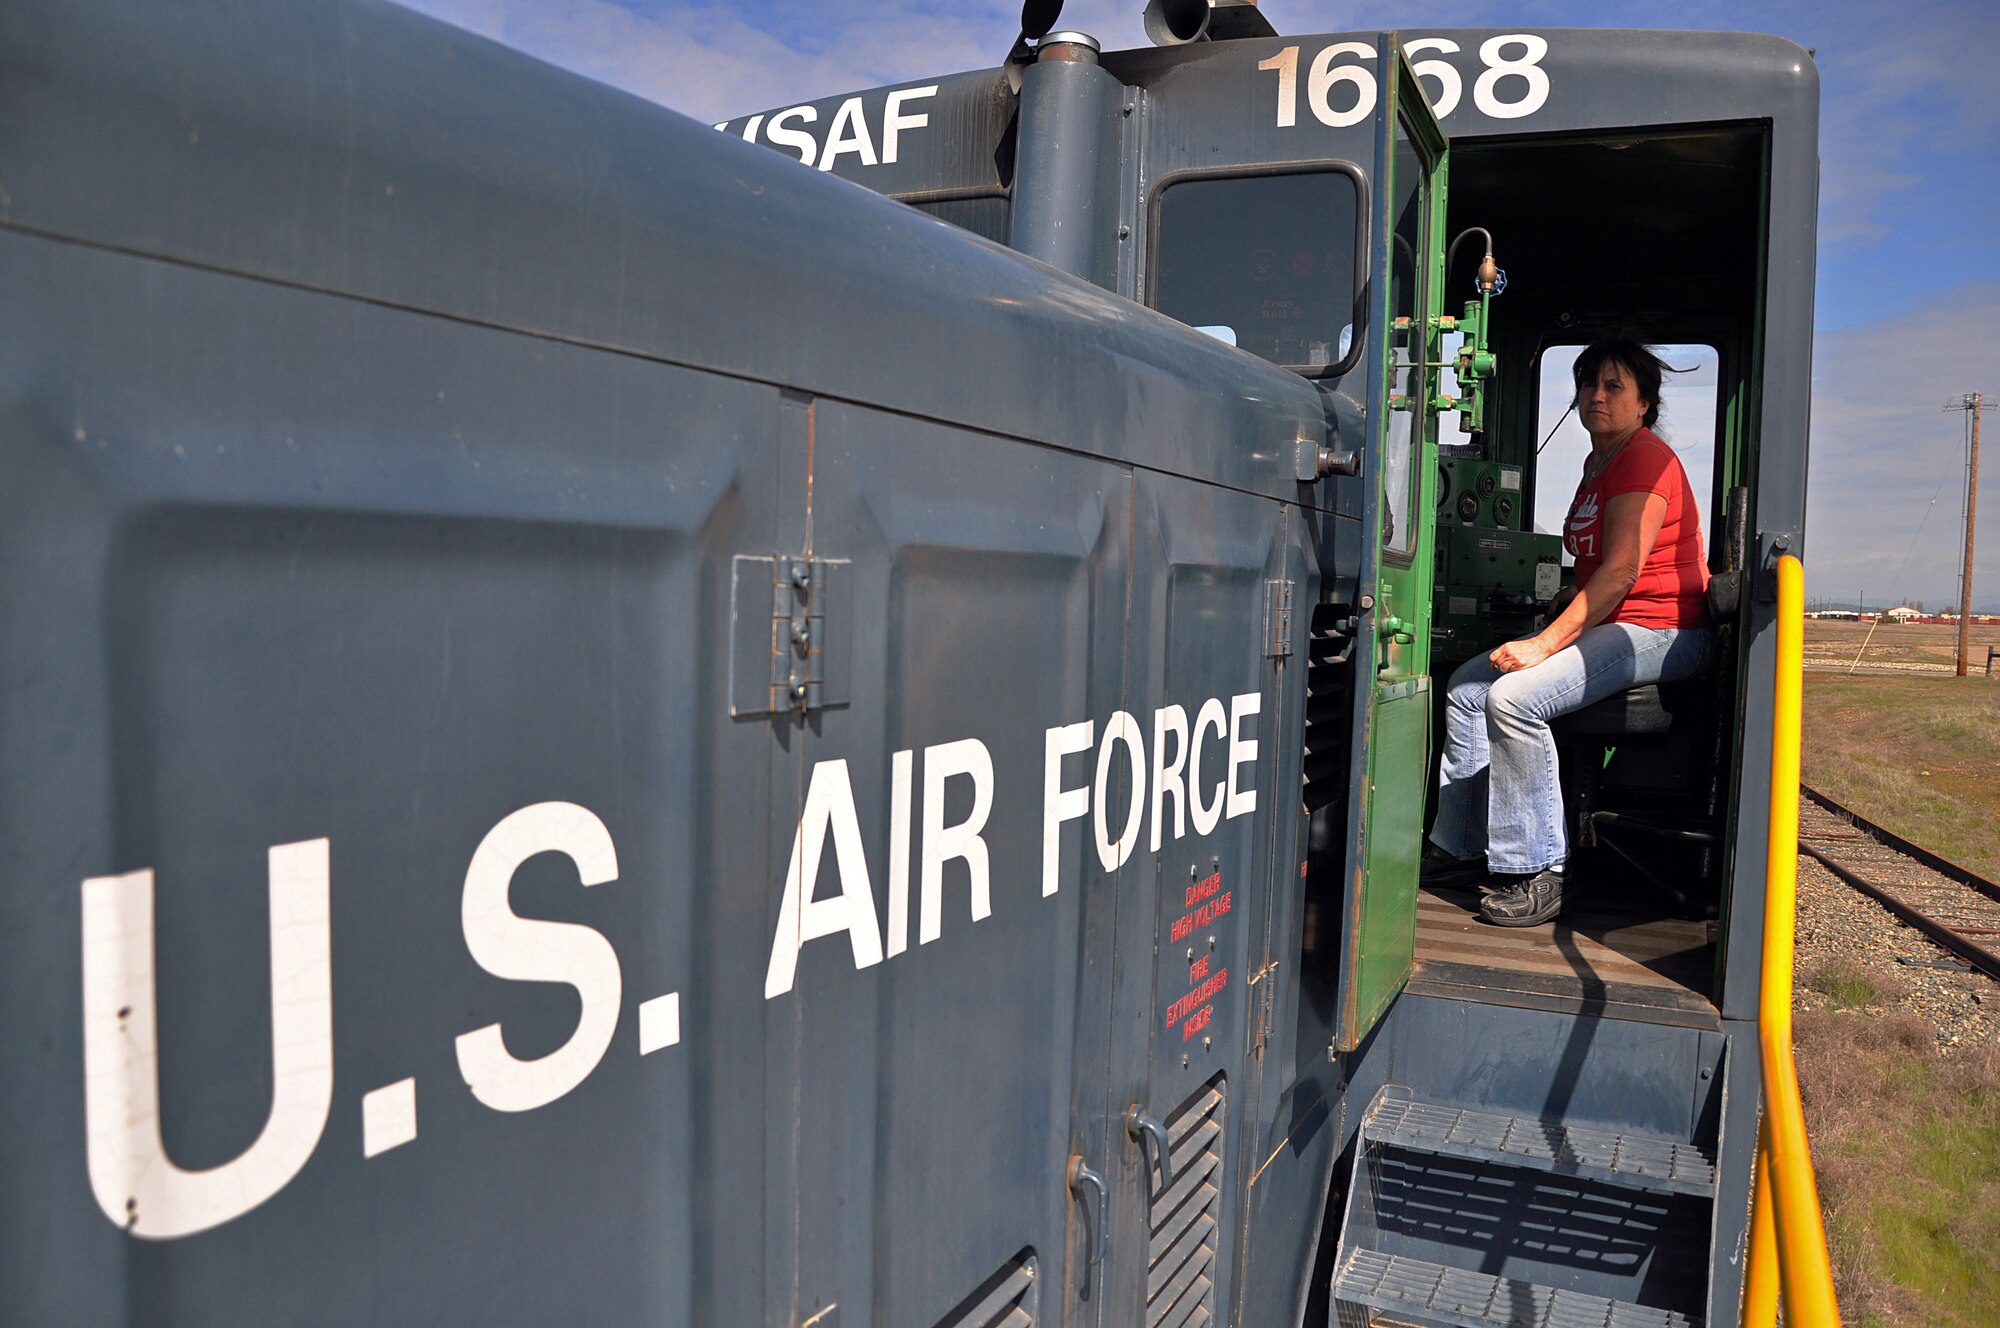 Susan Mertes, 9th Support Division locomotive engineer, operates a locomotive at Beale Air Force Base, Calif., March 21, 2012. Mertes operates one of the few locomotives in the Air Force inventory to deliver U-2 jet fuel to the base. (U.S. Air Force photo by Airman 1st Class Andrew Buchanan/Released)